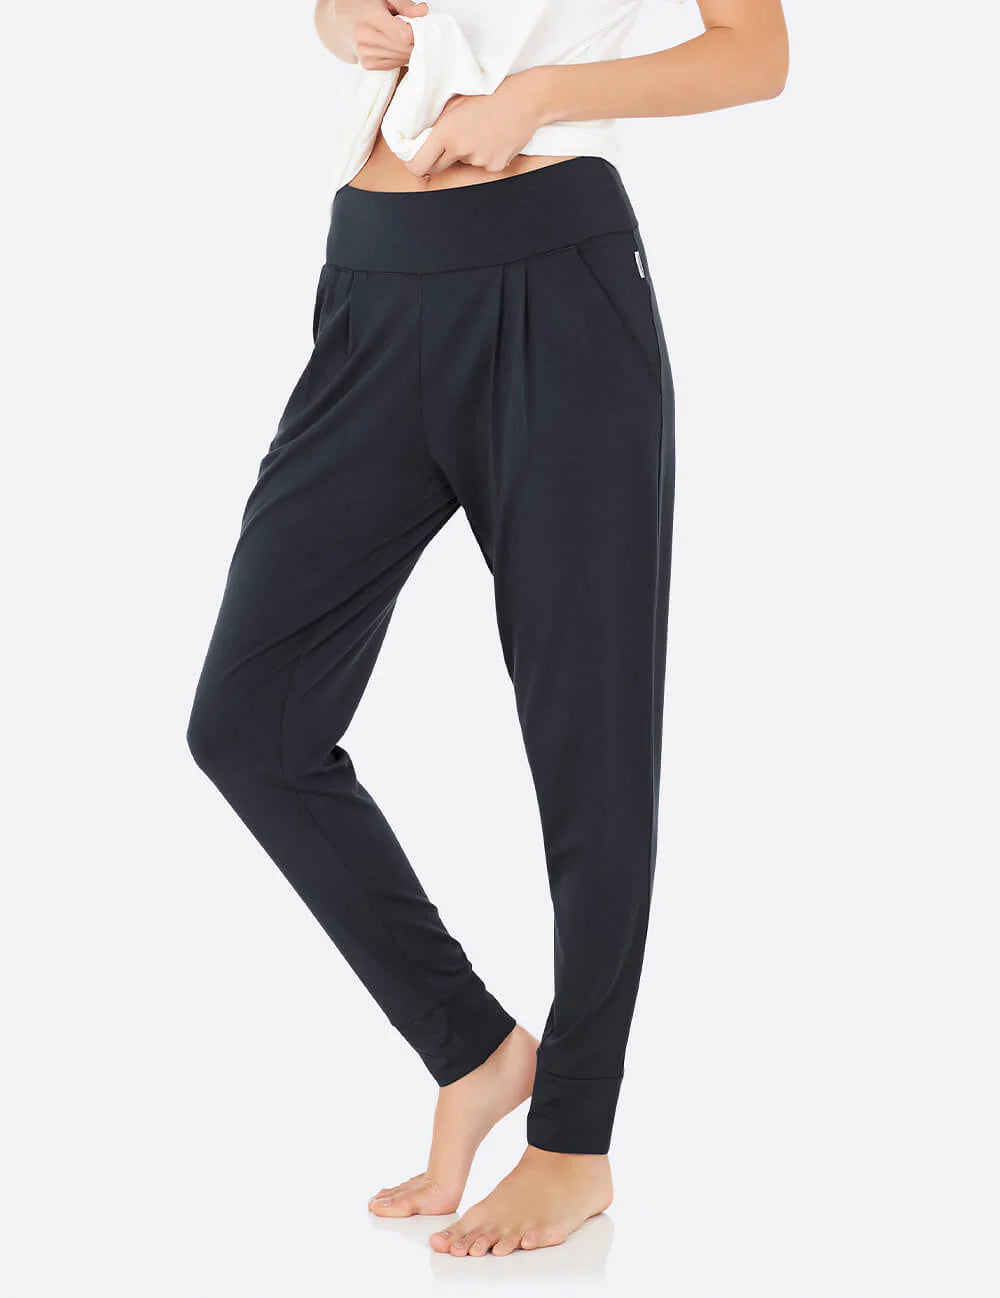 Downtime Lounge Pant - Storm